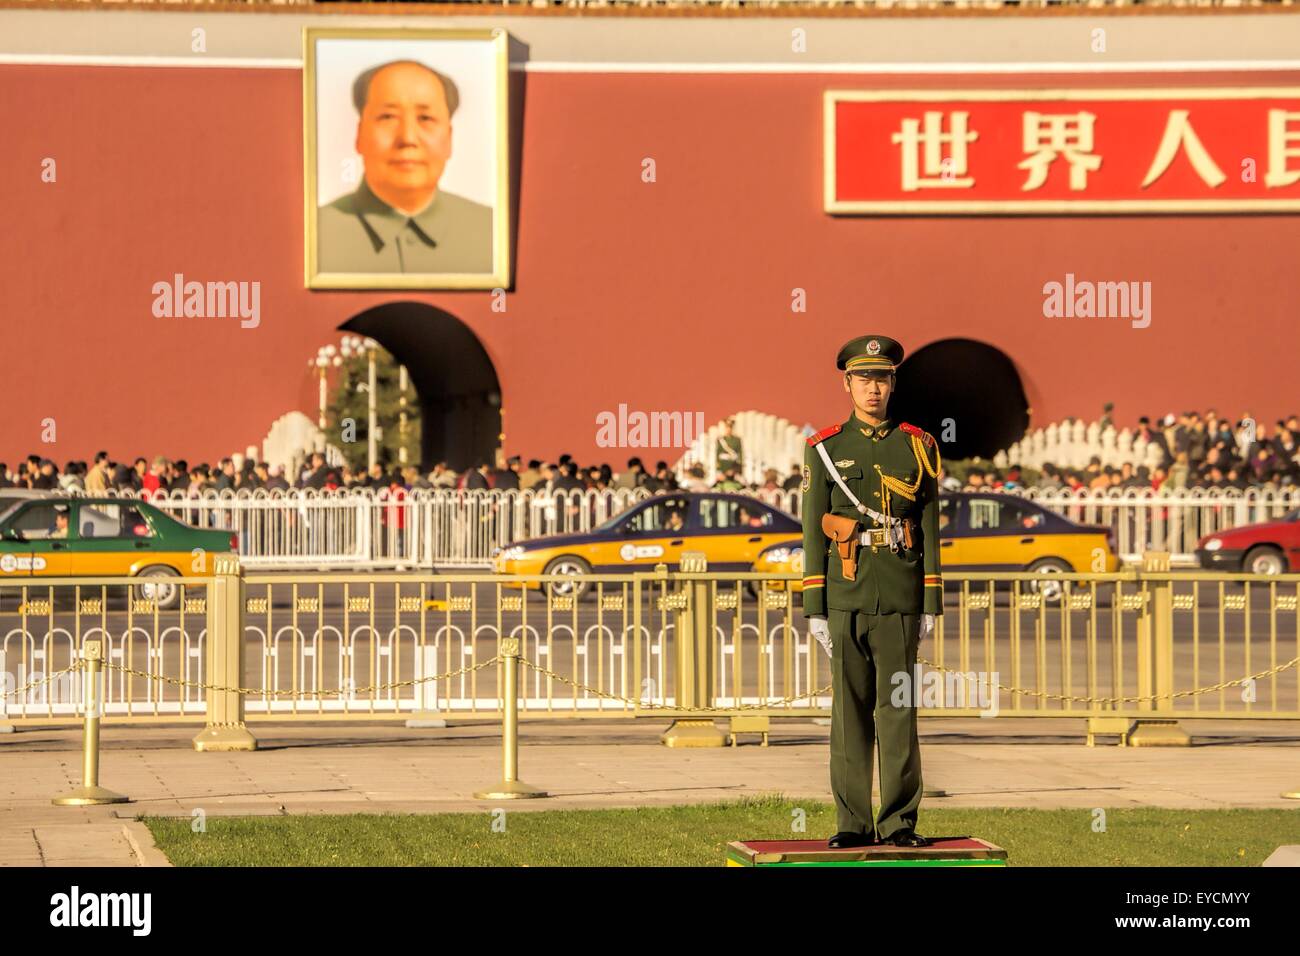 A guard stands watch in front of a portrait of Chairman Mao hanging from the wall of the Forbidden City in Tienanmen Square Stock Photo